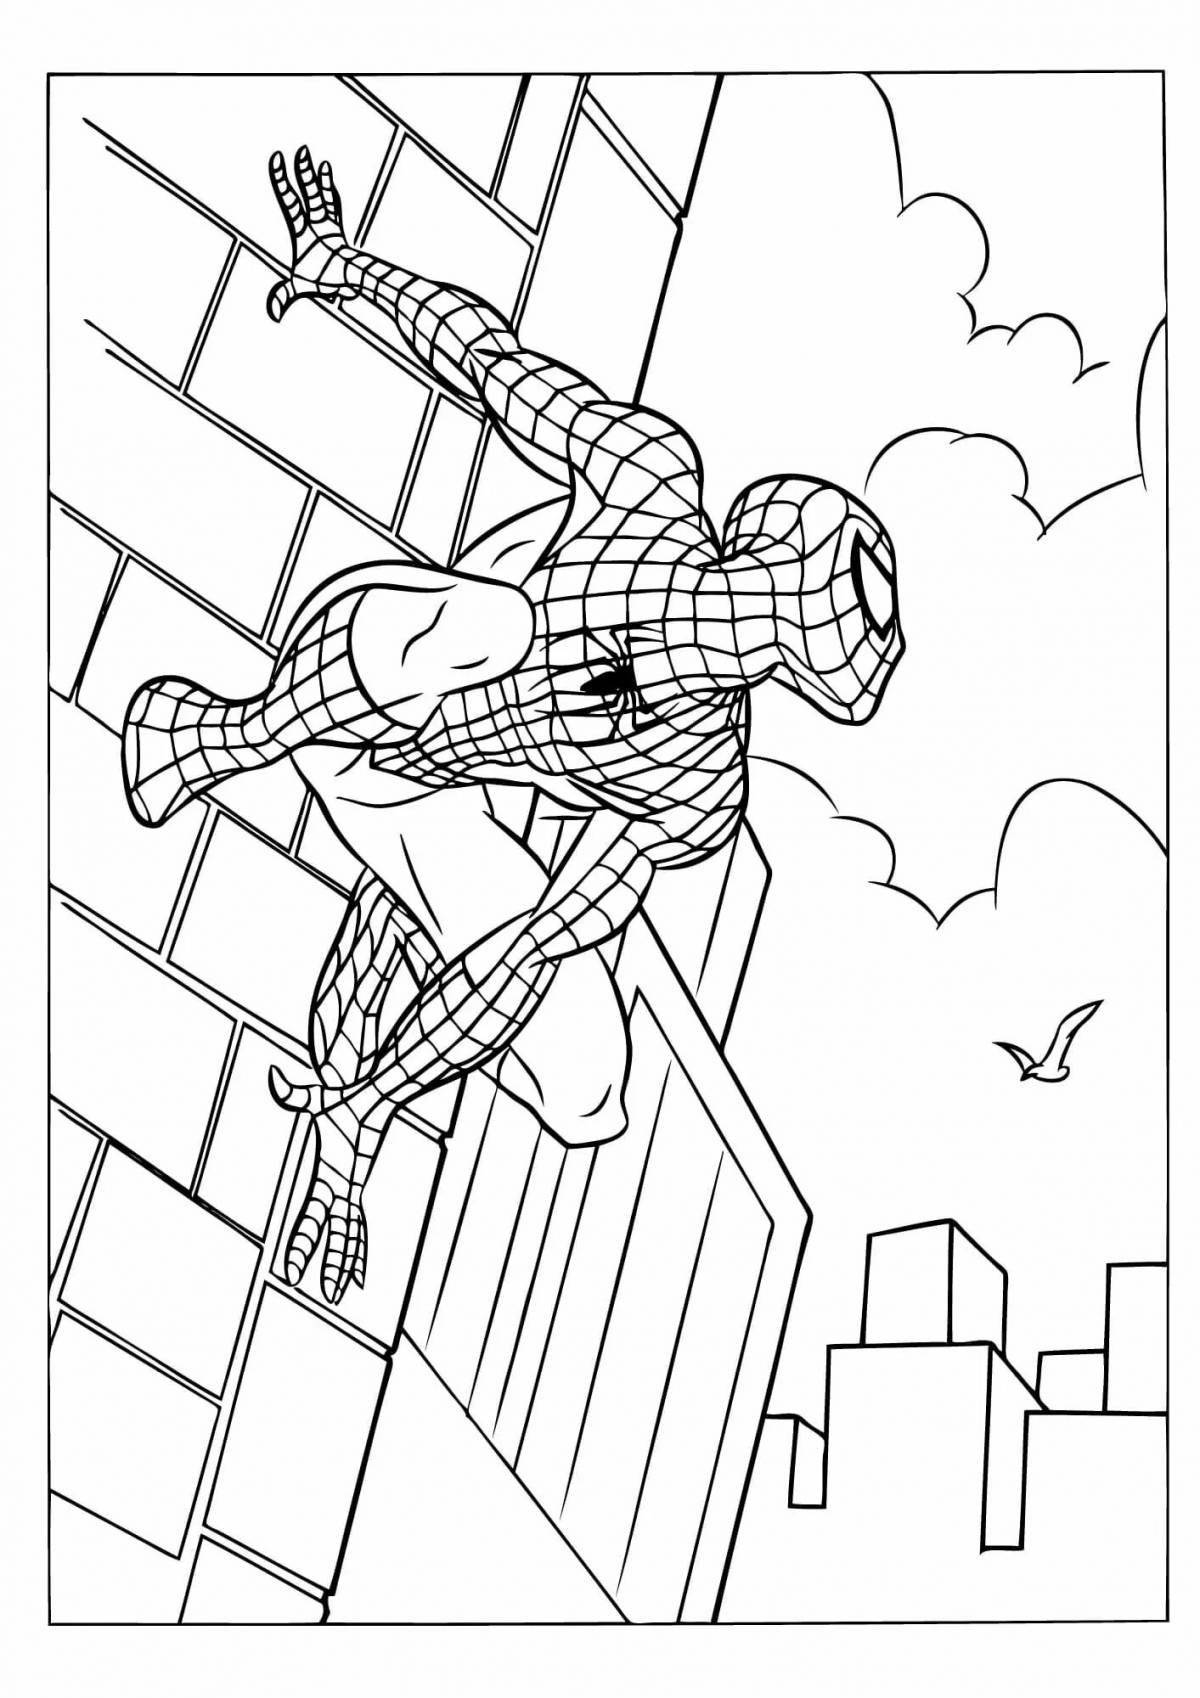 Magic Spider-Man coloring book for kids